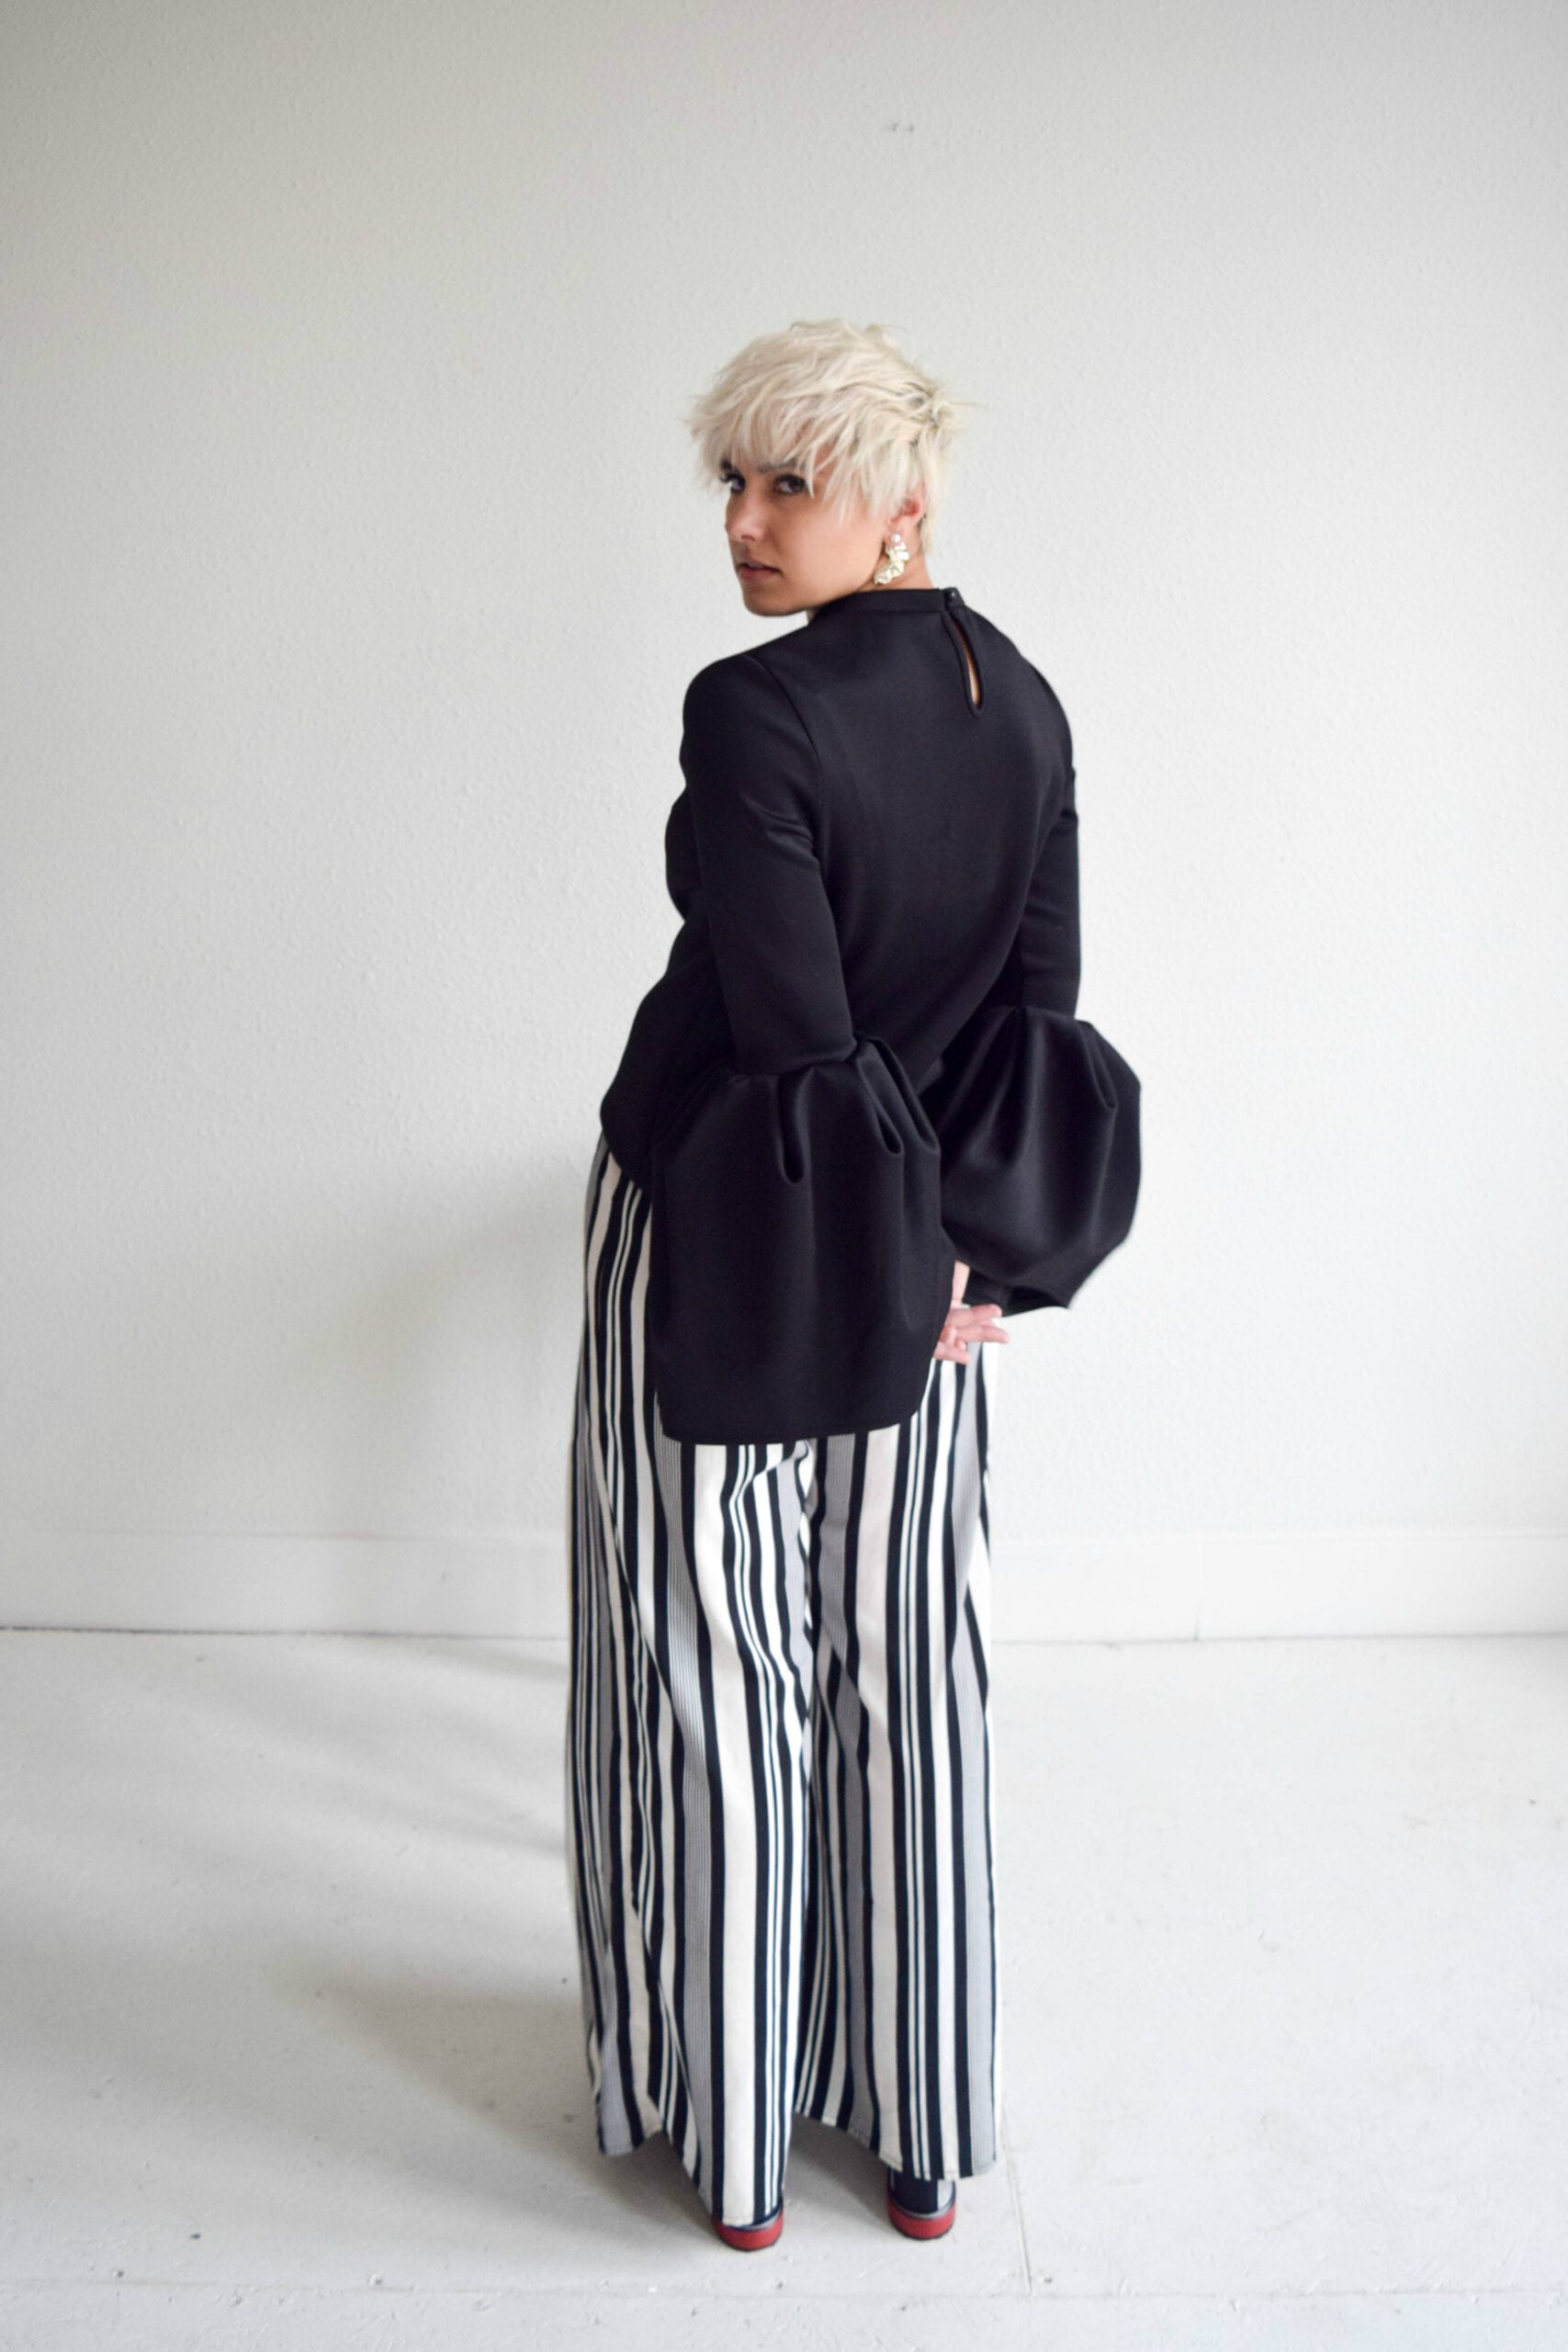 3 Ways to Wear Wide 90's Stripes Without Looking Like BeetleJuice